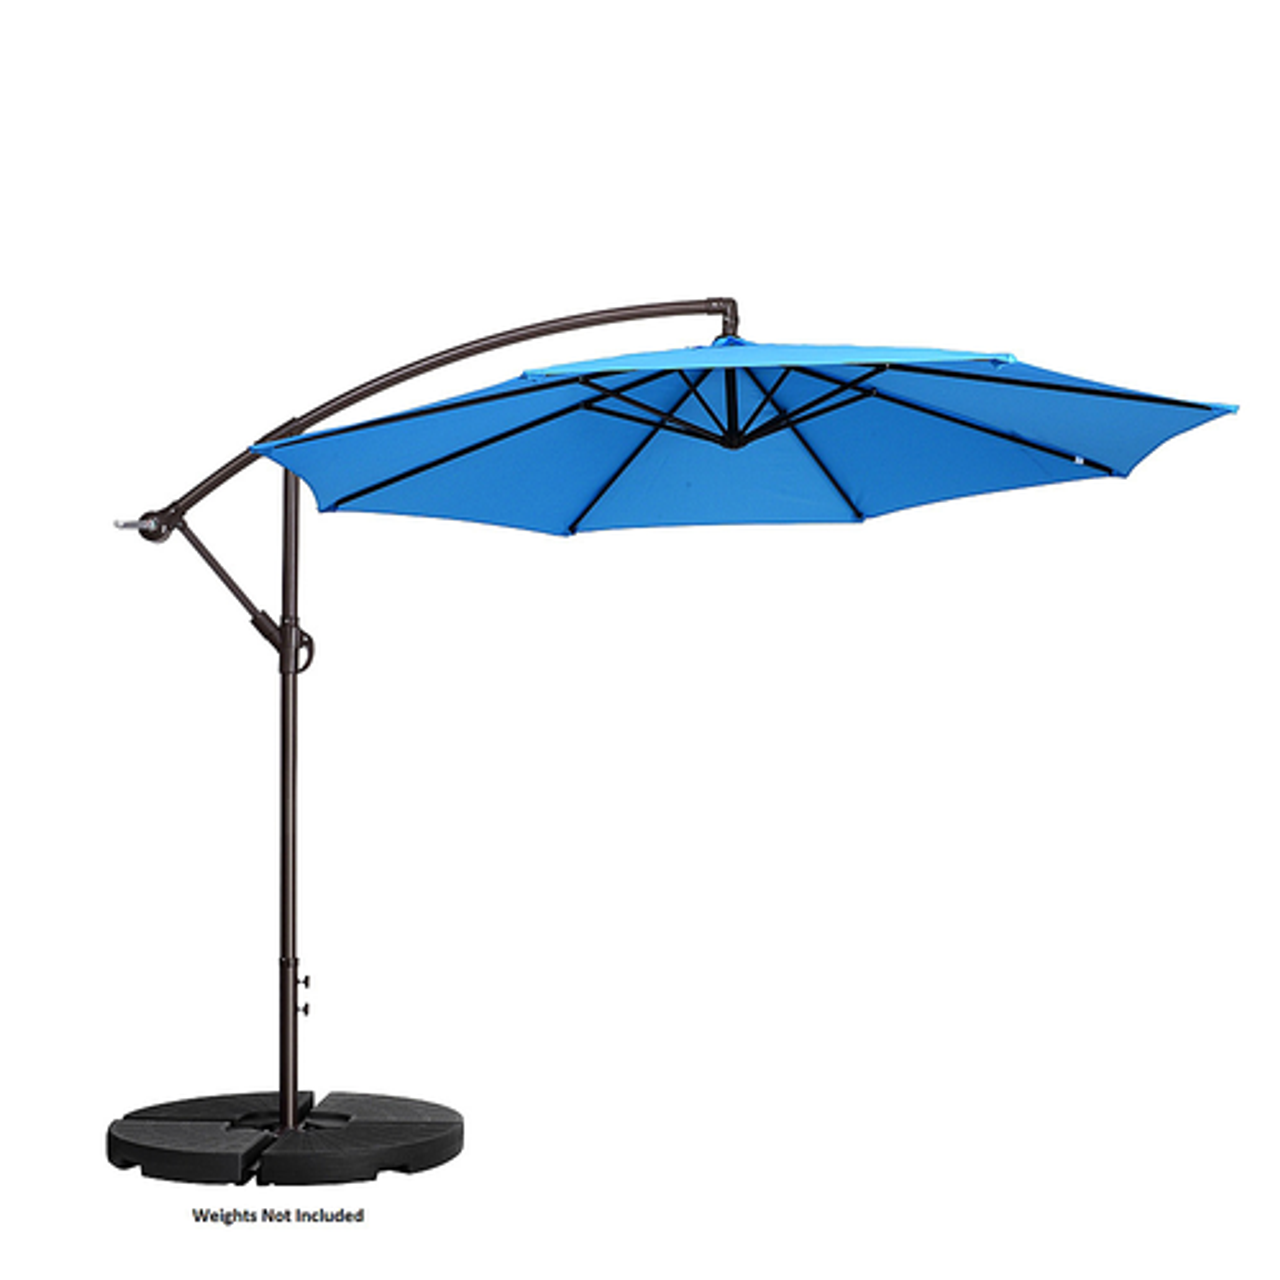 10' Offset Outdoor Patio Umbrella with 8 Steel Ribs and Vertical Tilt by Nature Spring (Blue) - Blue